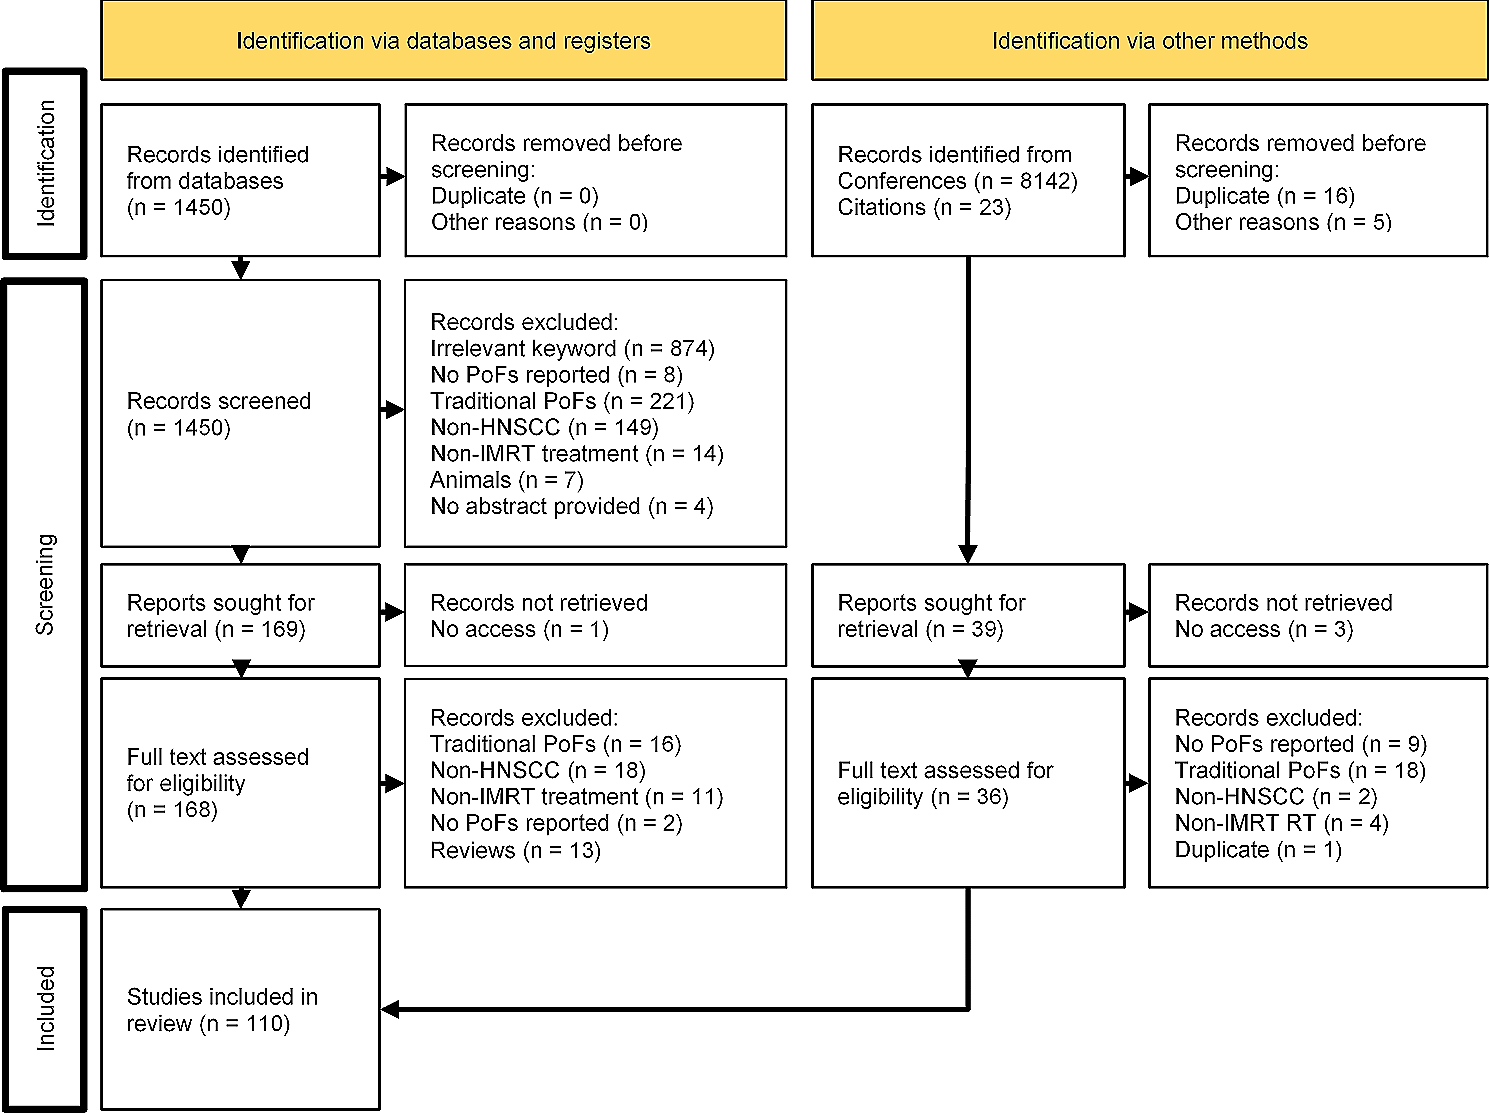 Consideration of image guidance in patterns of failure analyses of intensity-modulated radiotherapy for head and neck cancer: a systematic review